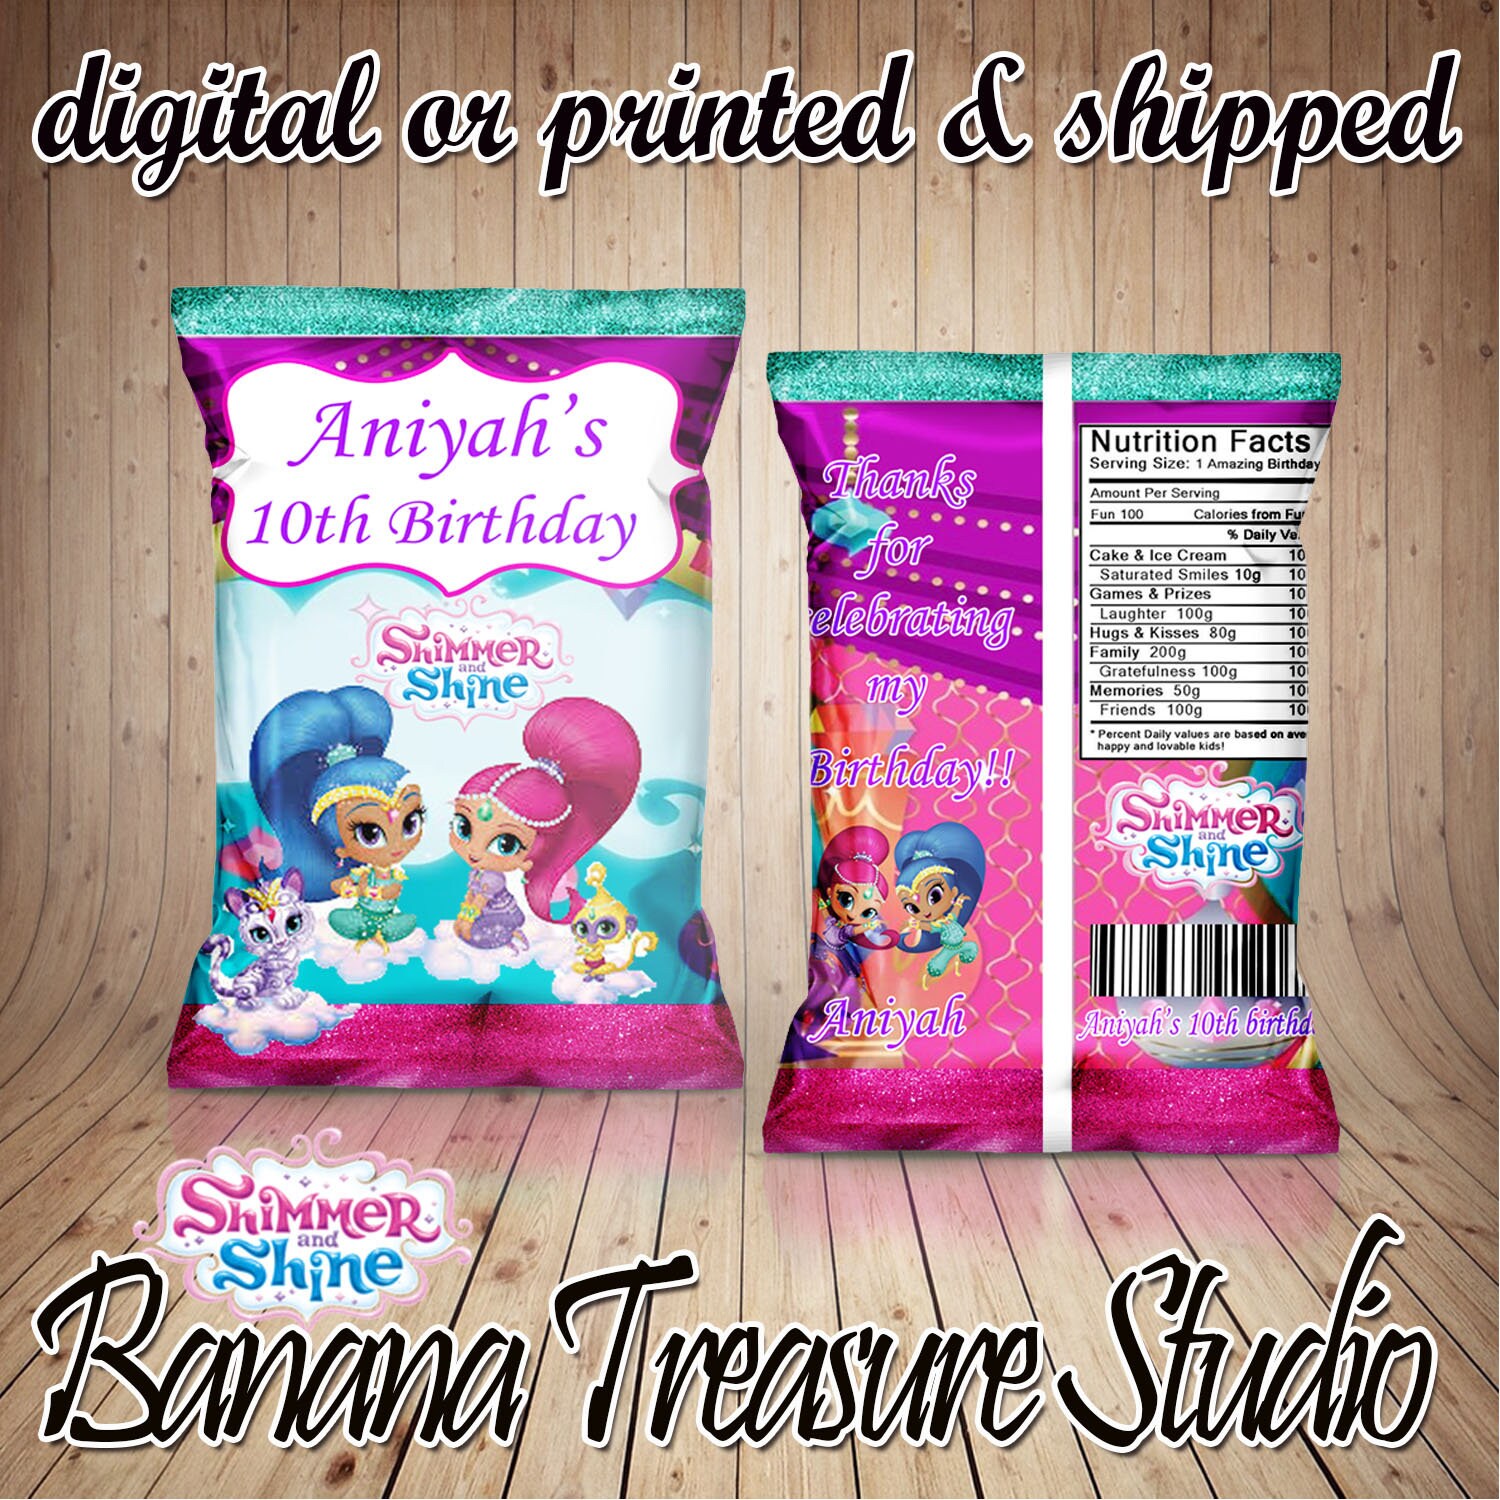 Shimmer and shine Chip bagas 8x10 Medium size Party Favors,souvenier,Kids gifts